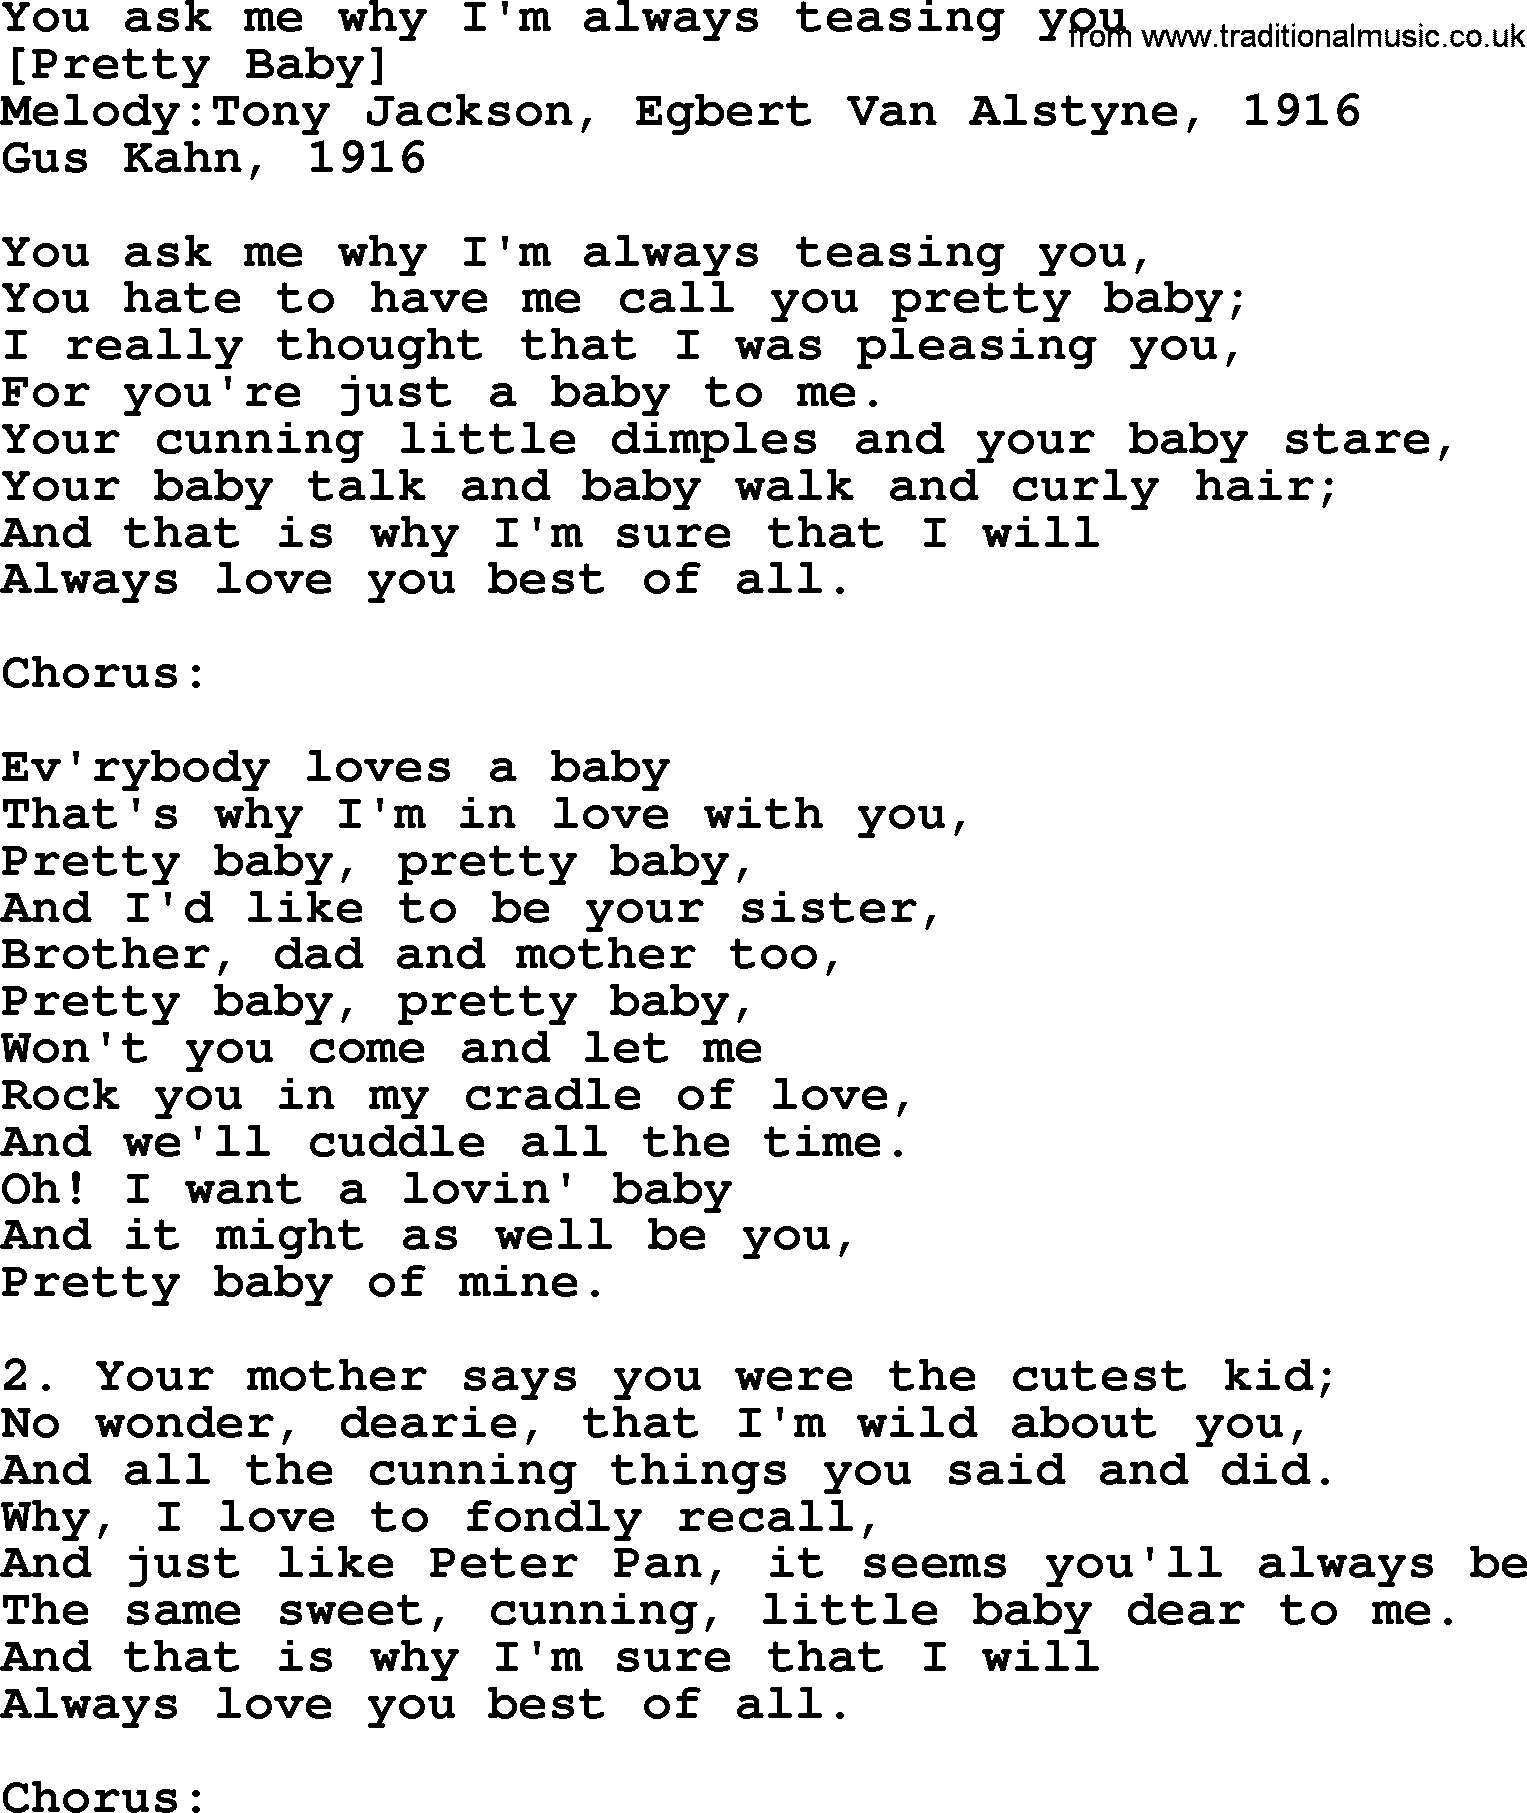 Old American Song: You Ask Me Why I'm Always Teasing You, lyrics